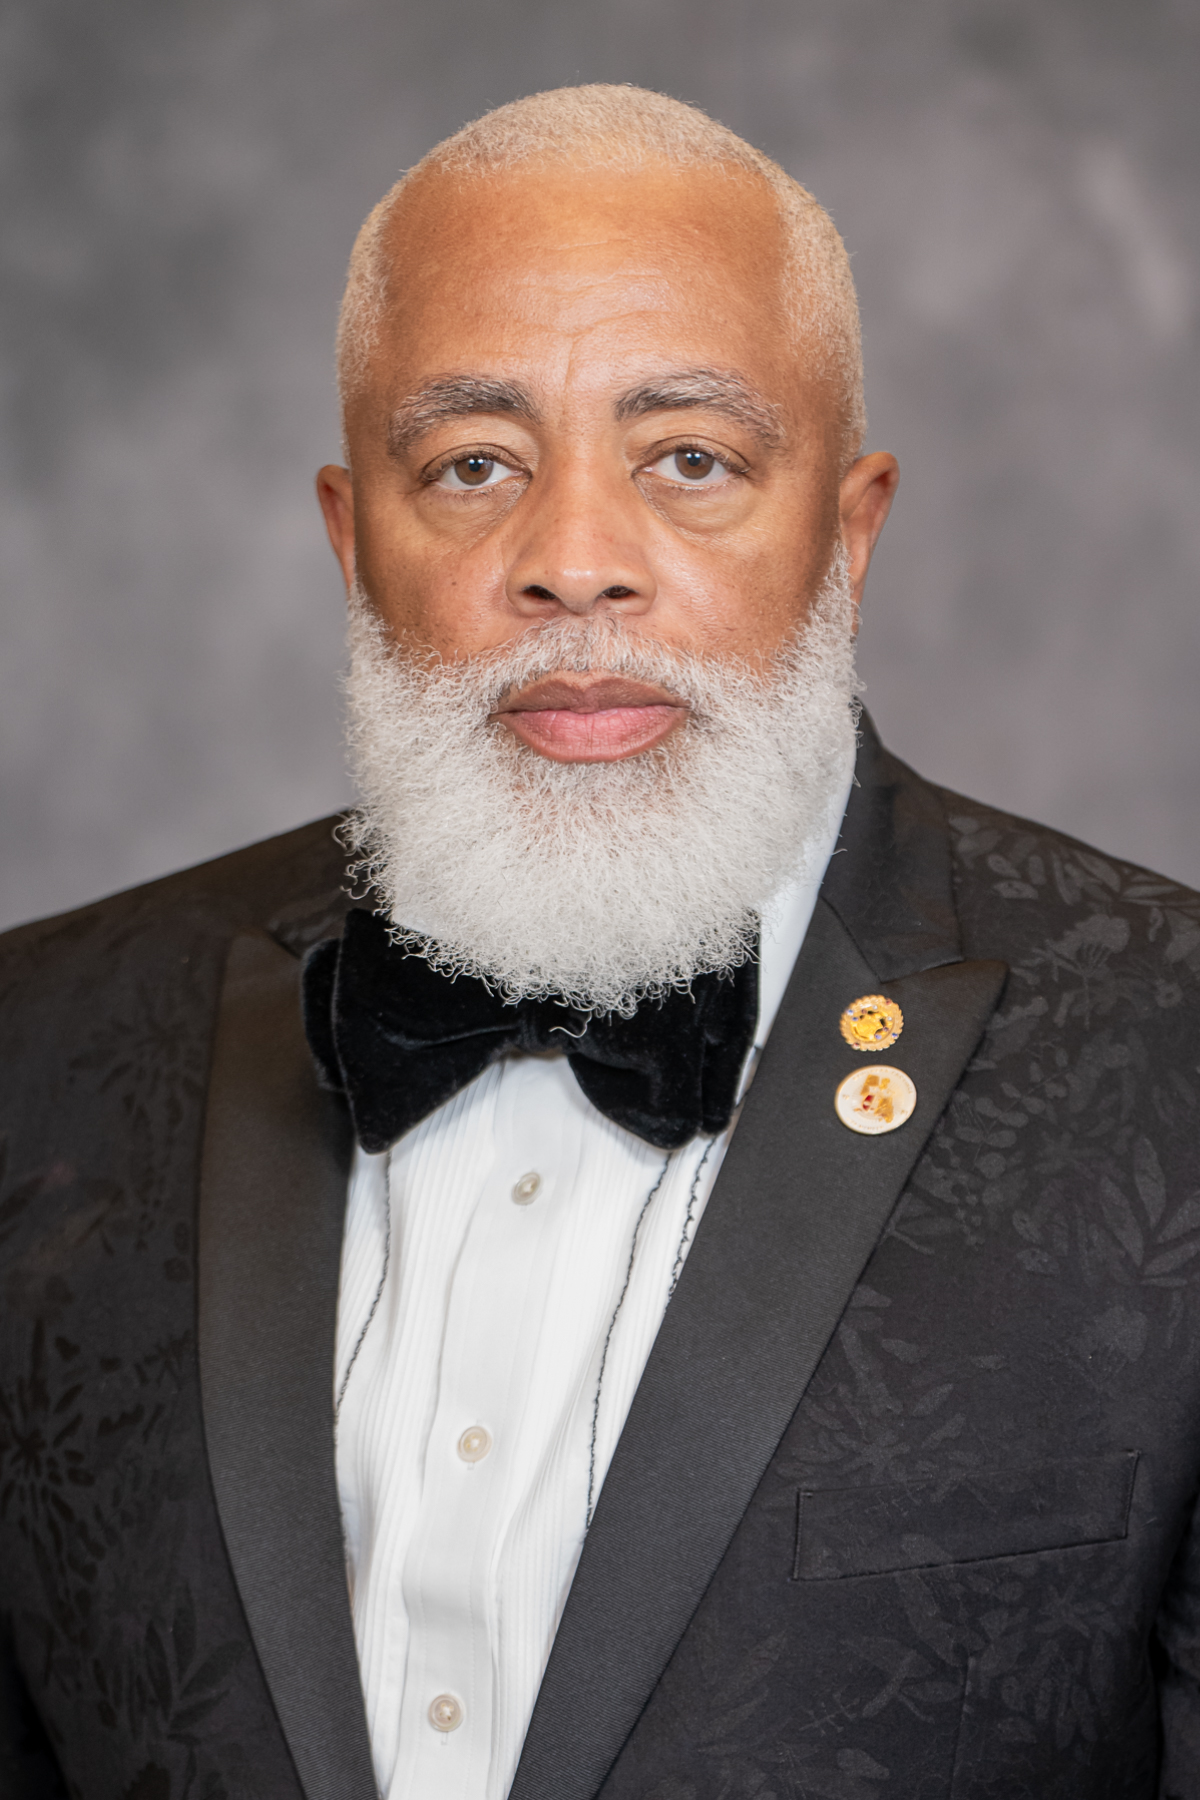 Gregory L. Williams